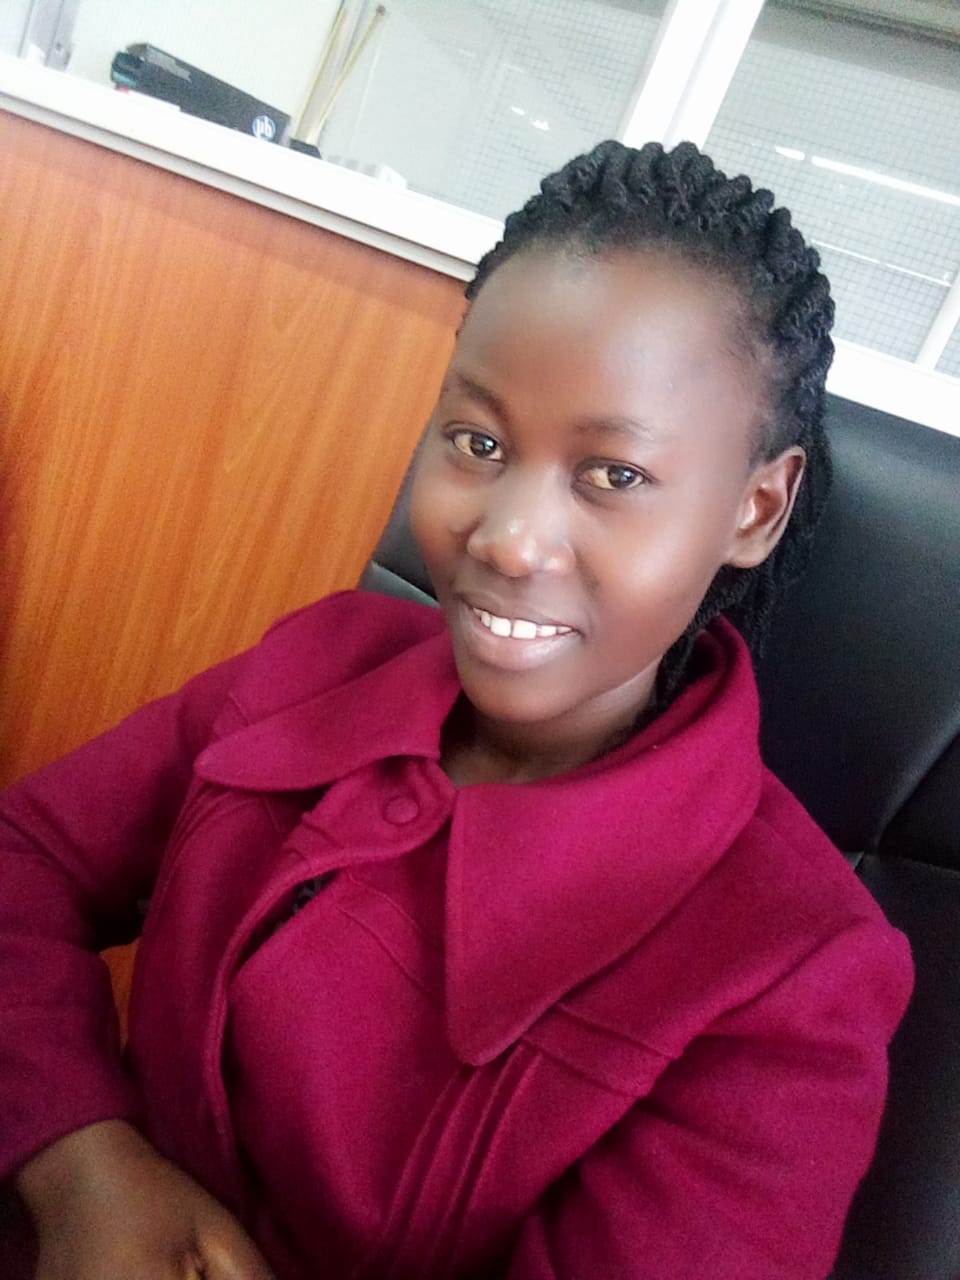 Rose Adhiambo Anyona is one such student, and she has written to tell you how much education means to her.